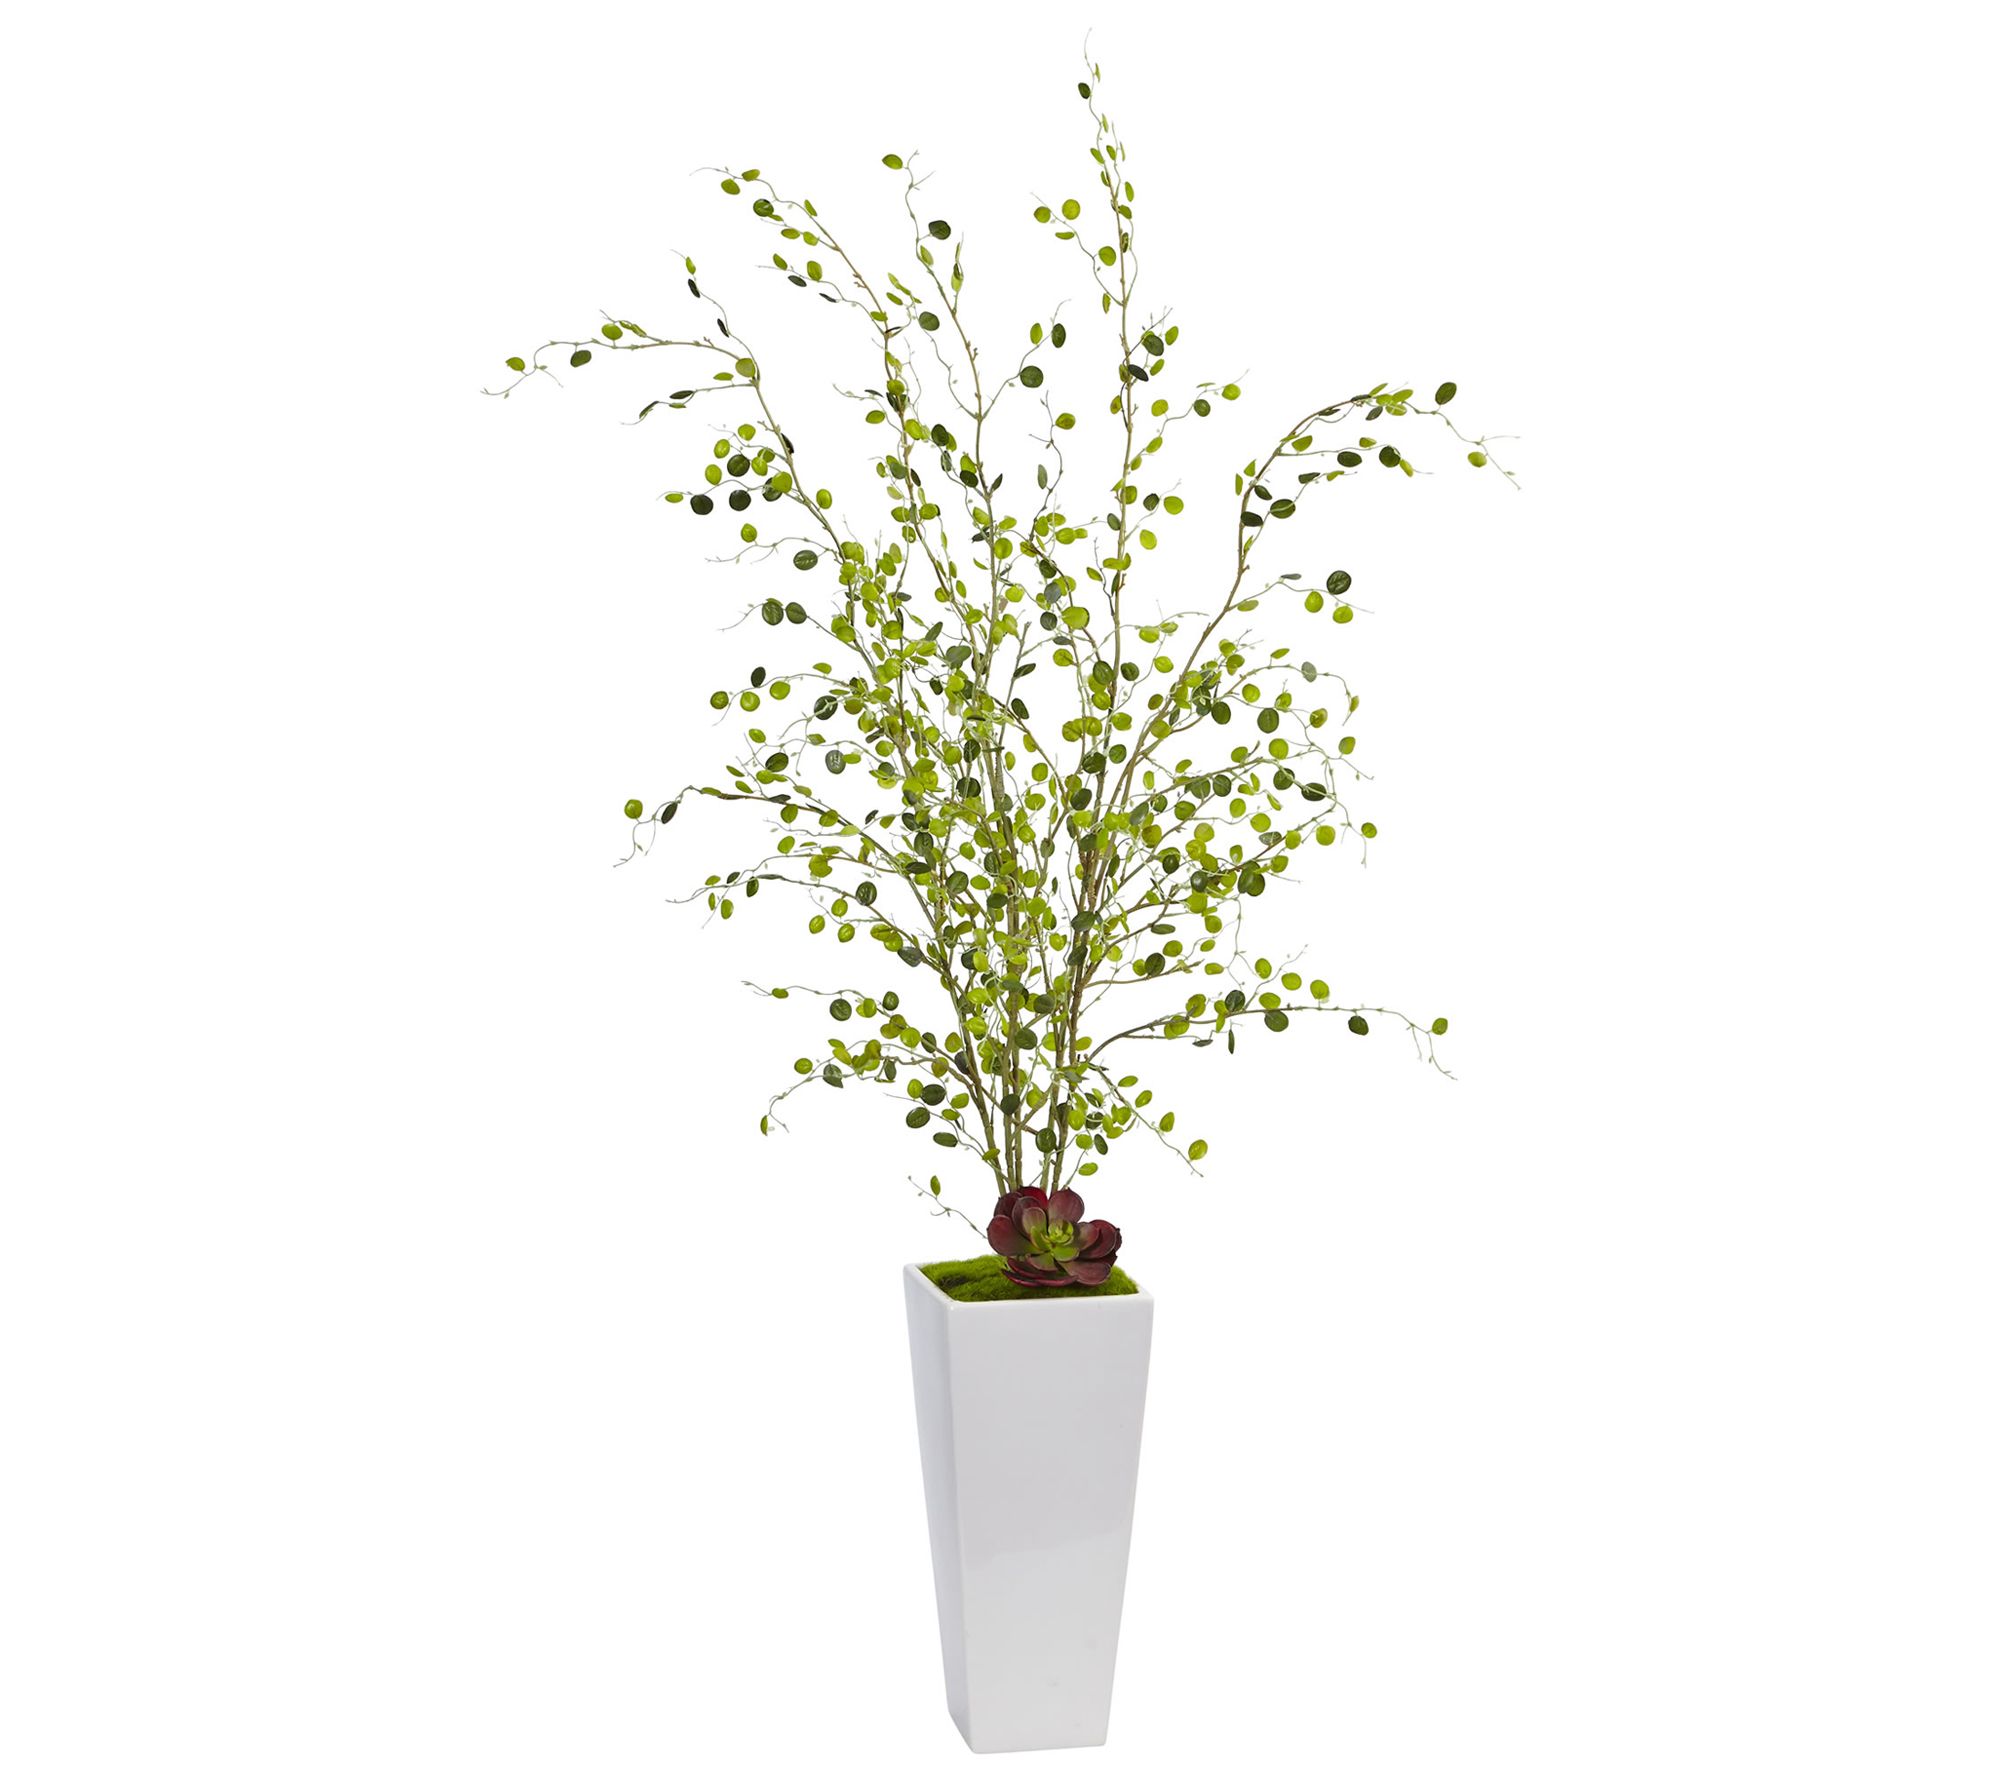 Night Willow in White Planter by Nearly Natural - QVC.com